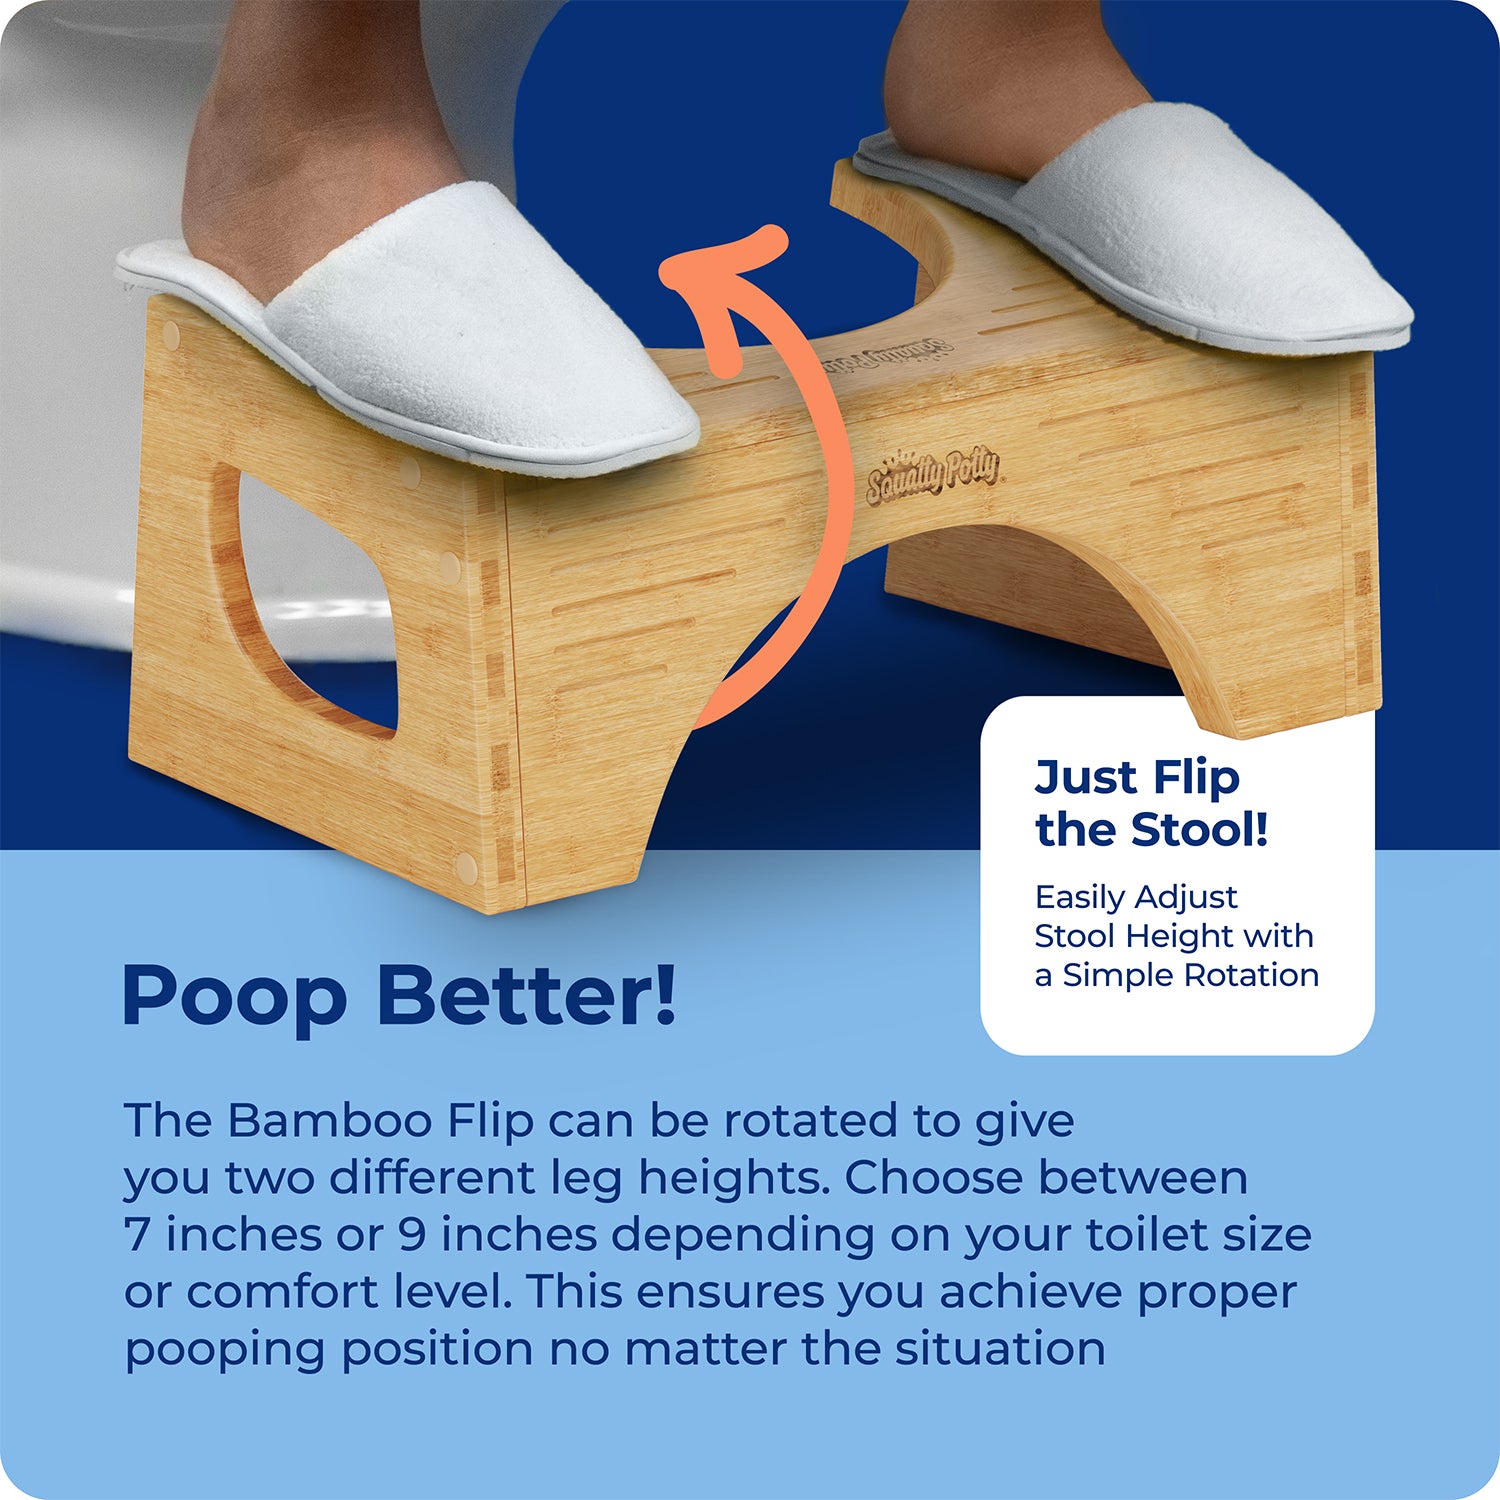 How to Use a Squatty Potty 